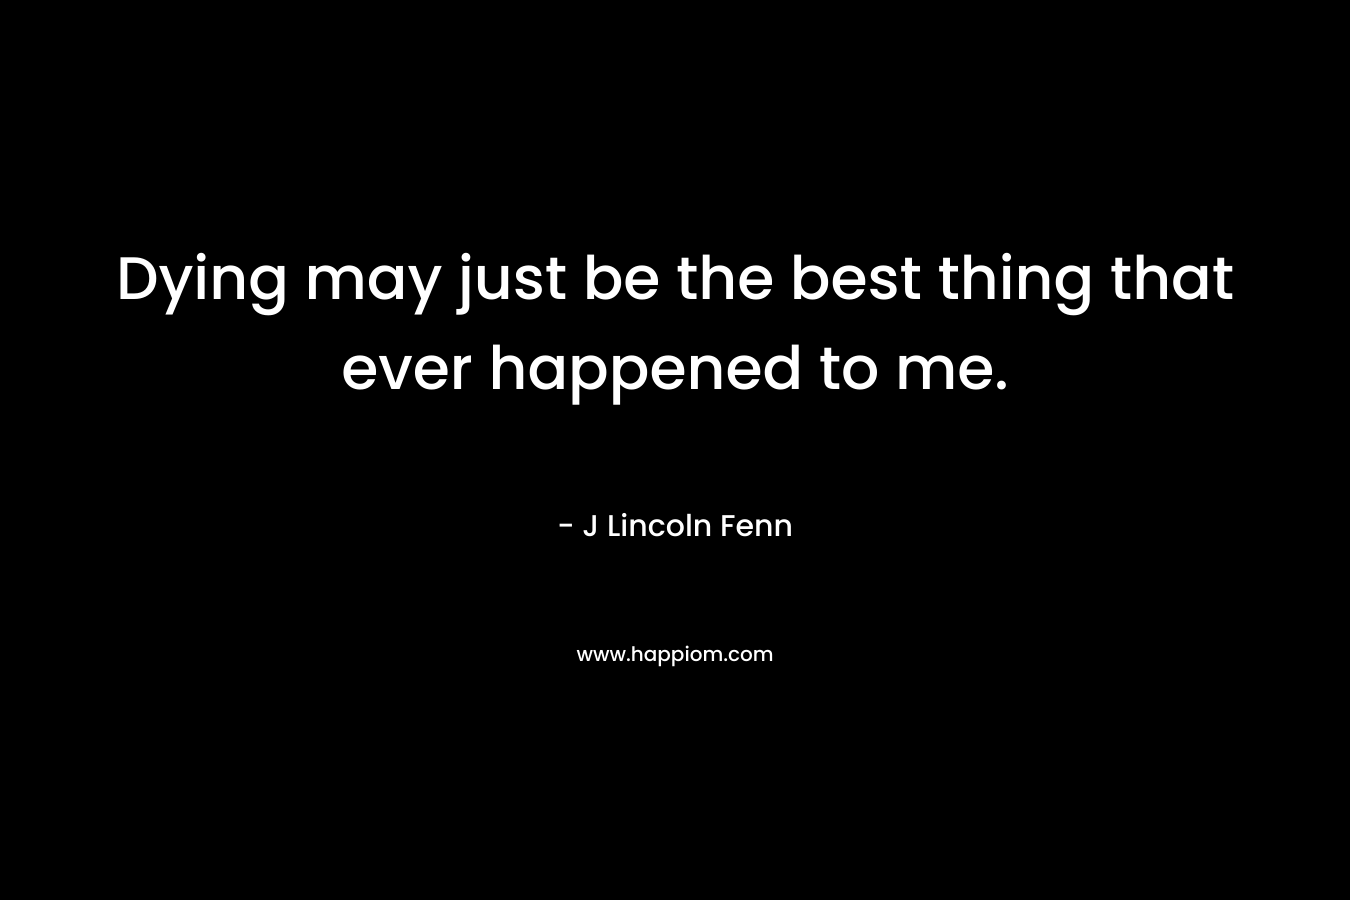 Dying may just be the best thing that ever happened to me. – J Lincoln Fenn